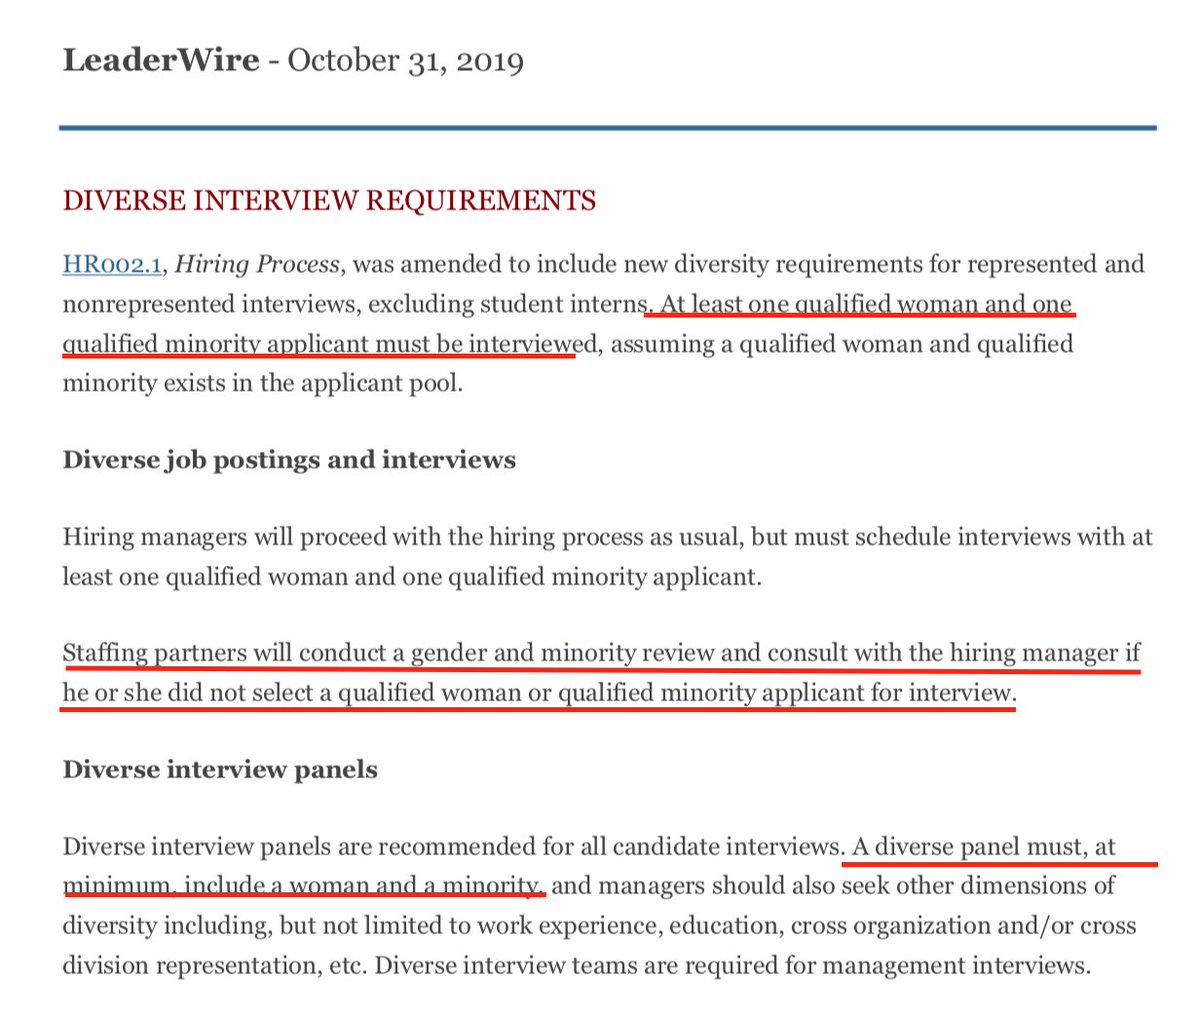 Last year, Sandia Labs implemented a new policy that managers must conduct "gender and minority review[s]" and "include a woman and a minority" in all job interview panels and candidate pools. If they do not comply, they must report this failure to senior managers.